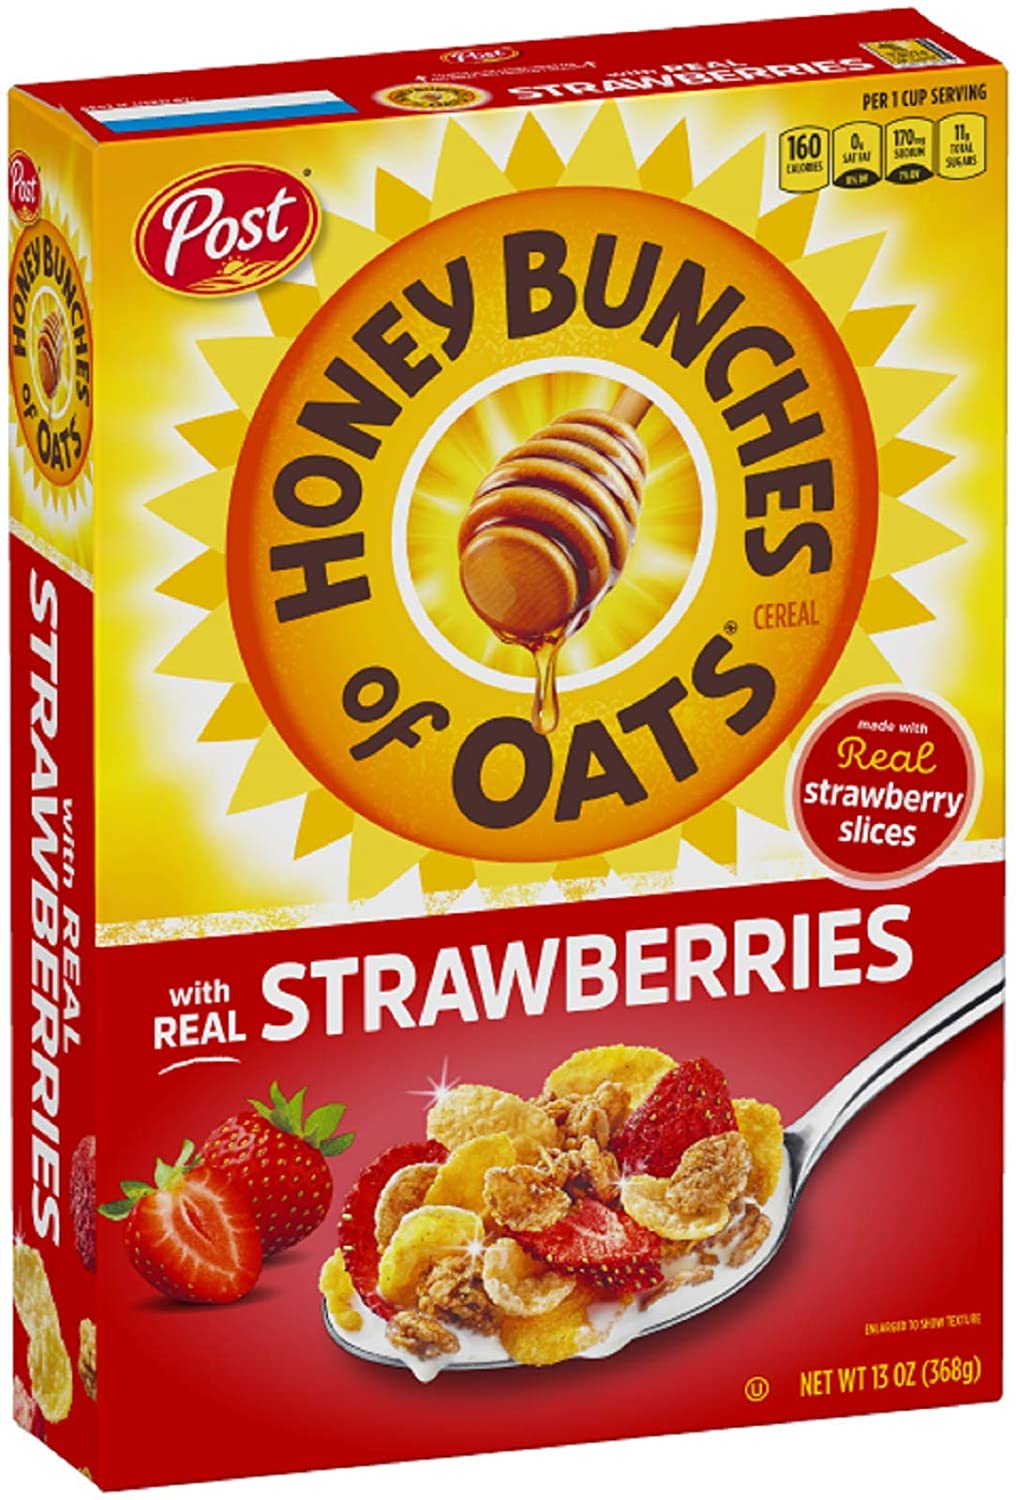 Post Honey Bunches of Oats with real Strawberries, 13 oz